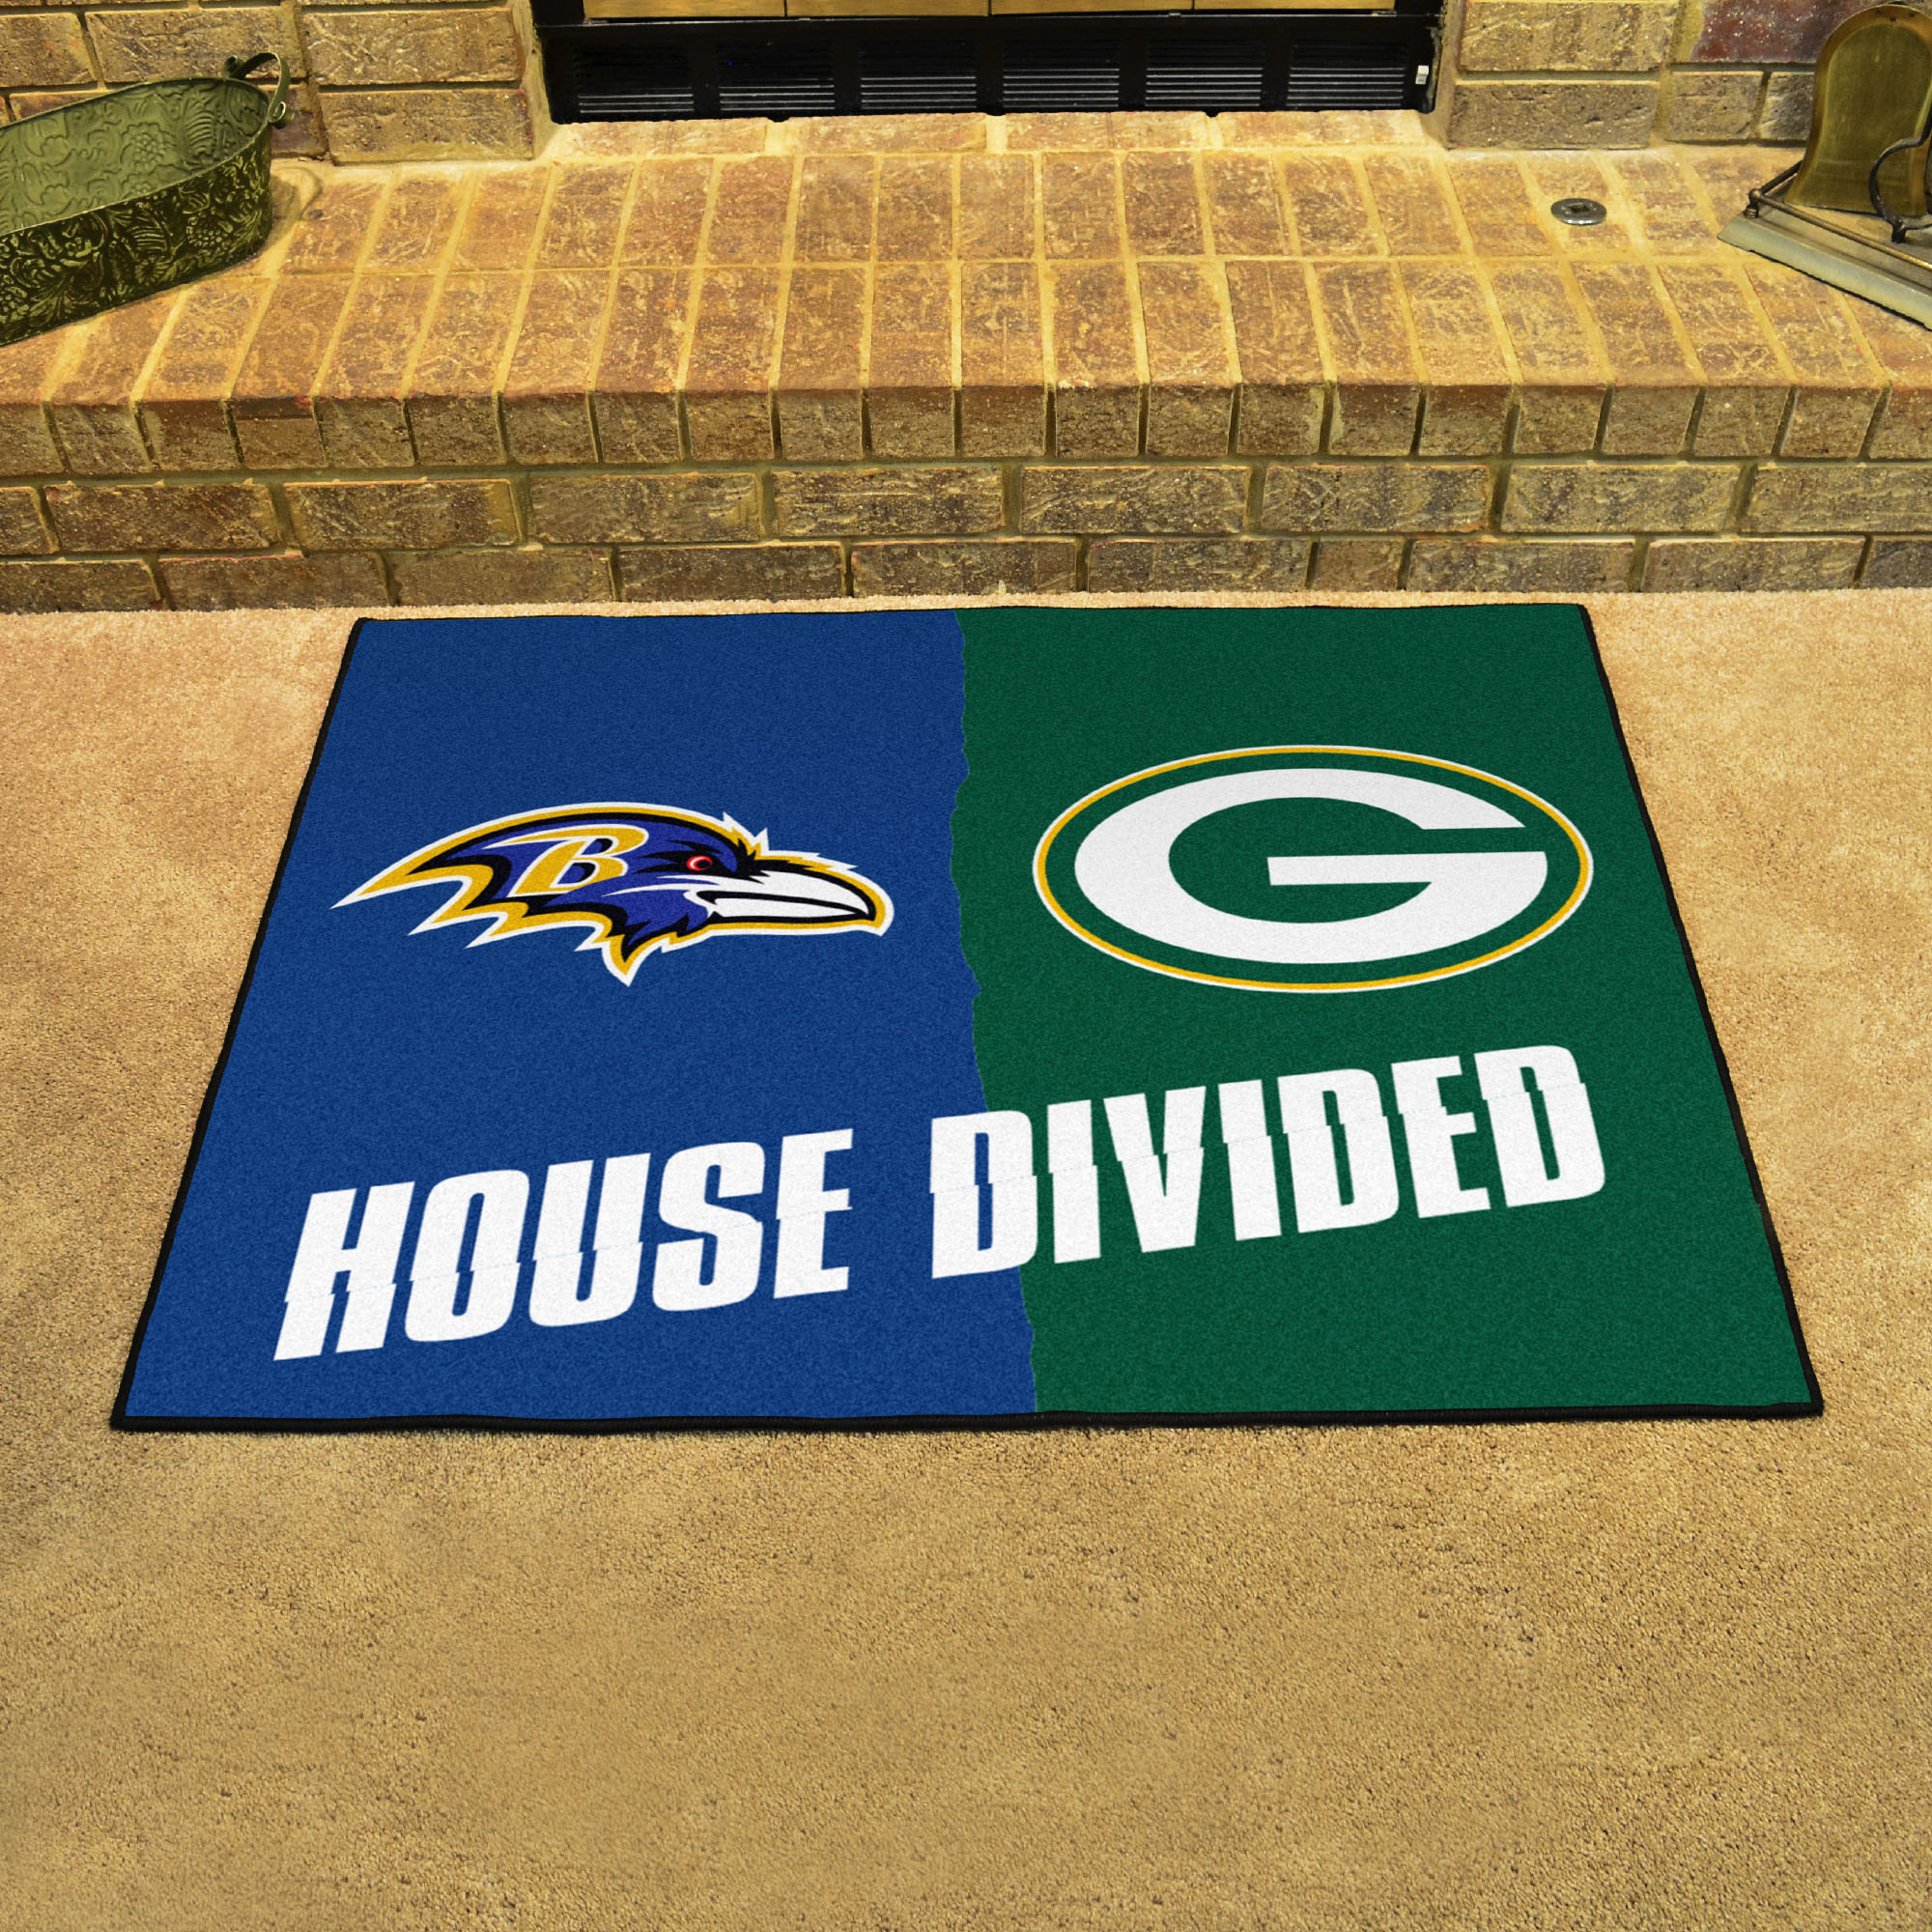 Ravens - Packers House Divided Mat - 34 x 45